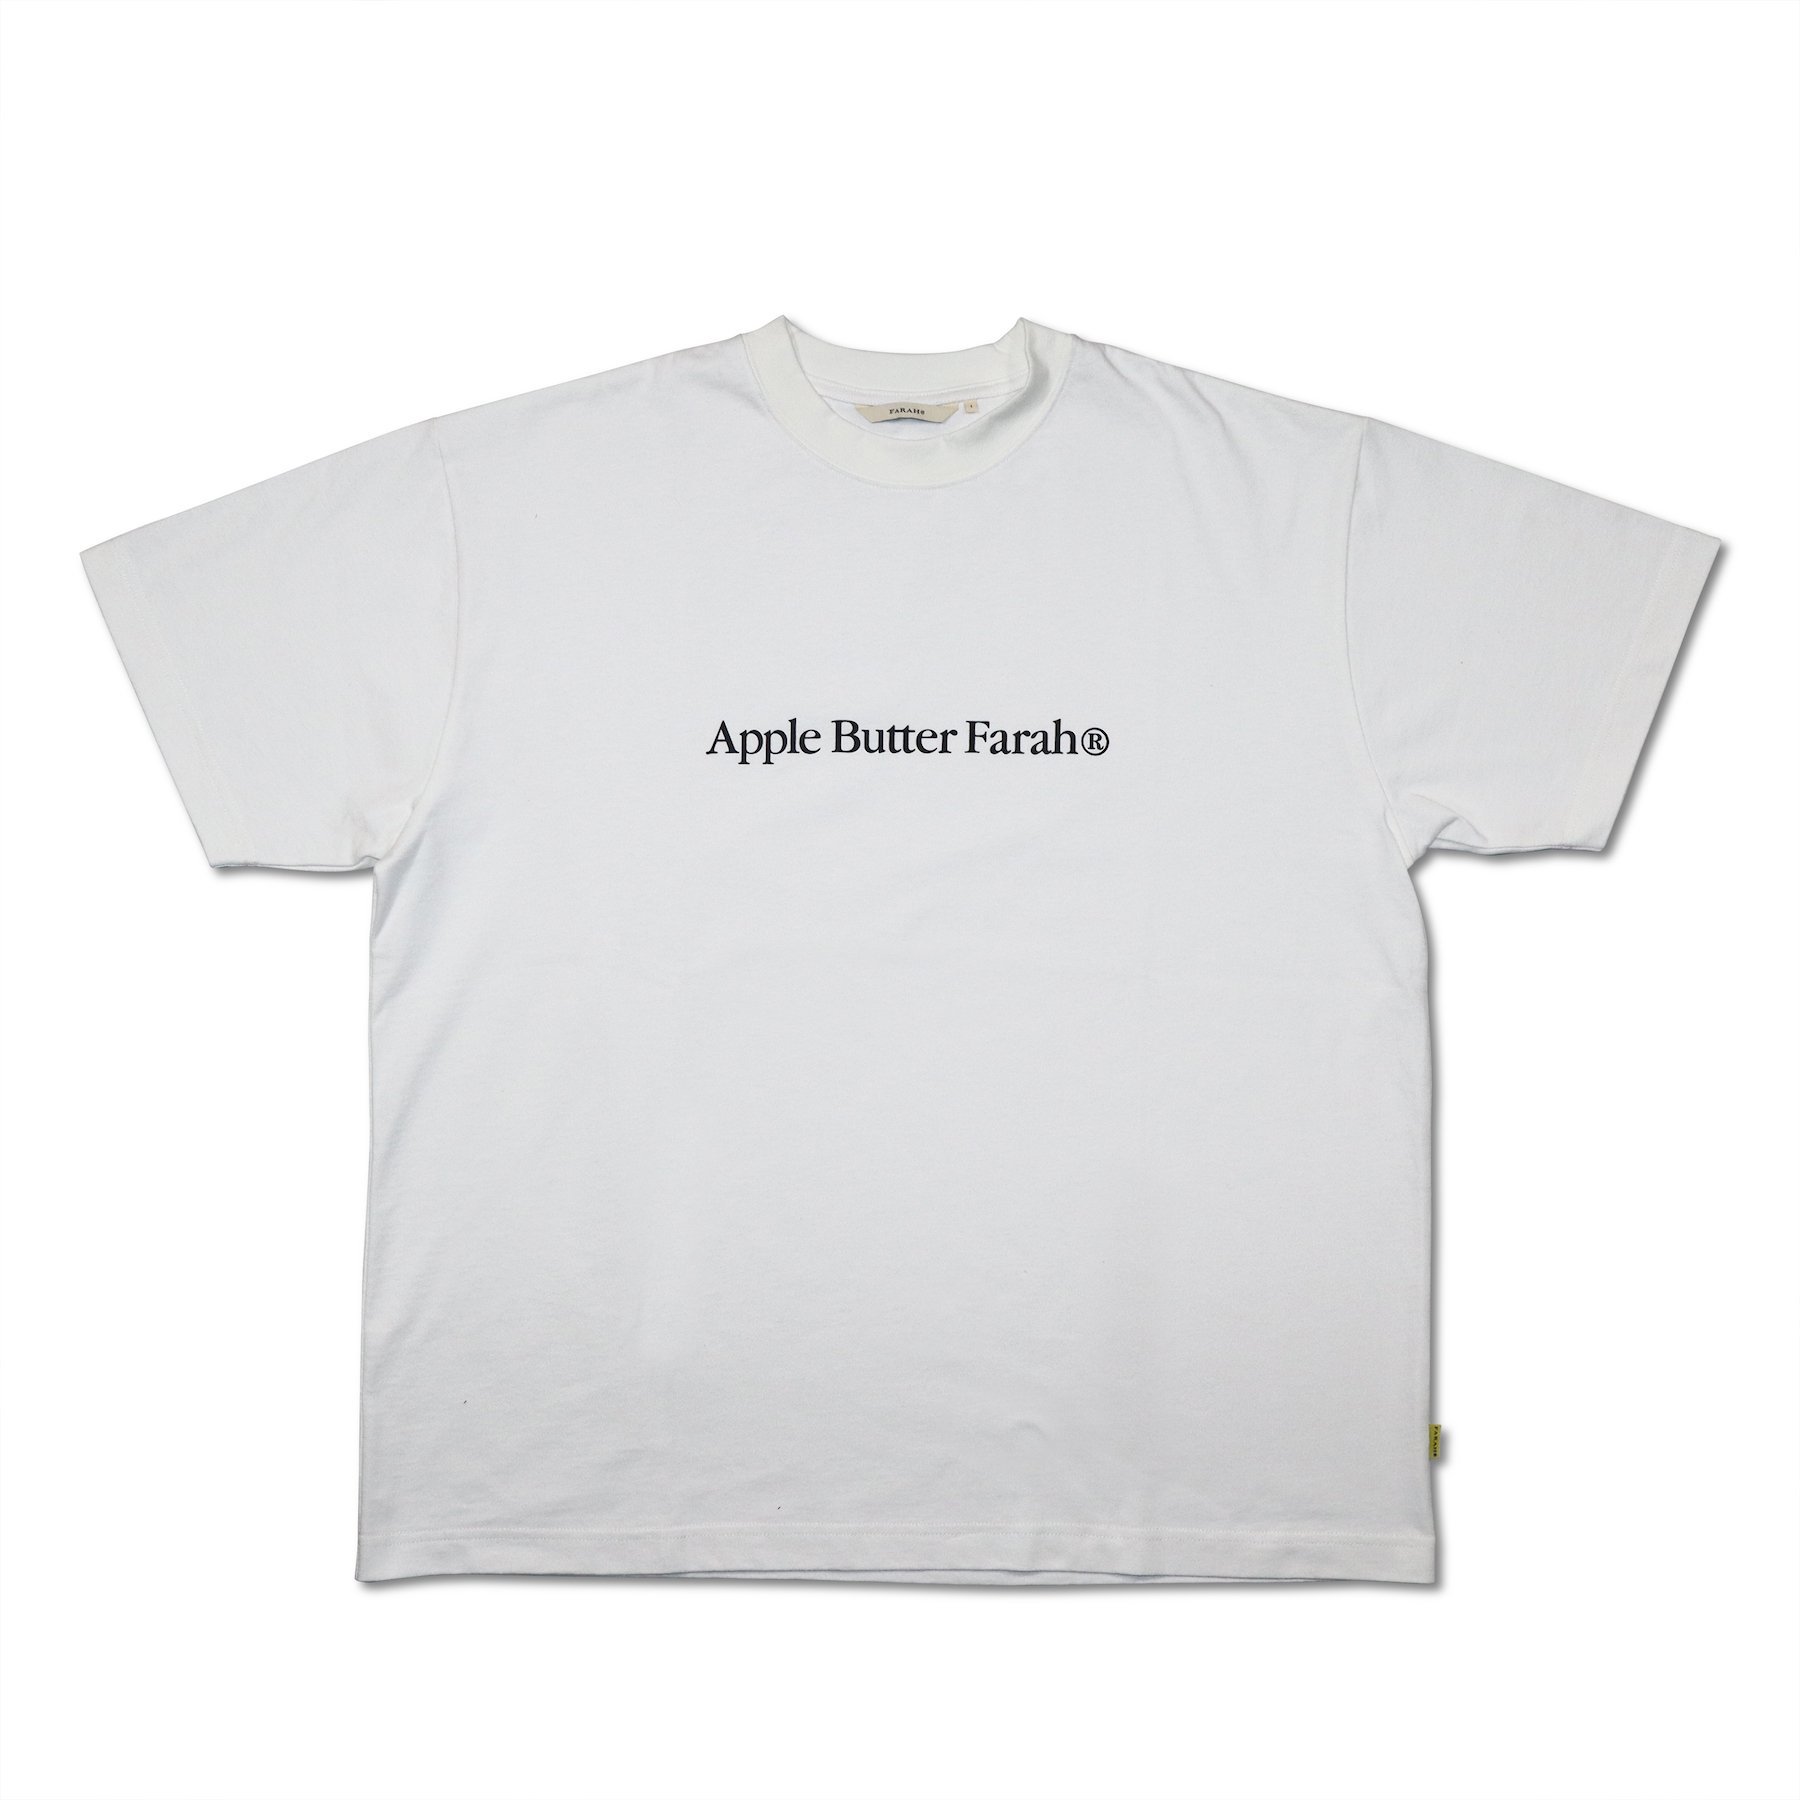 FARAH  APPLE BUTTER STORE<br>Logo Printed S/S Tee<br>